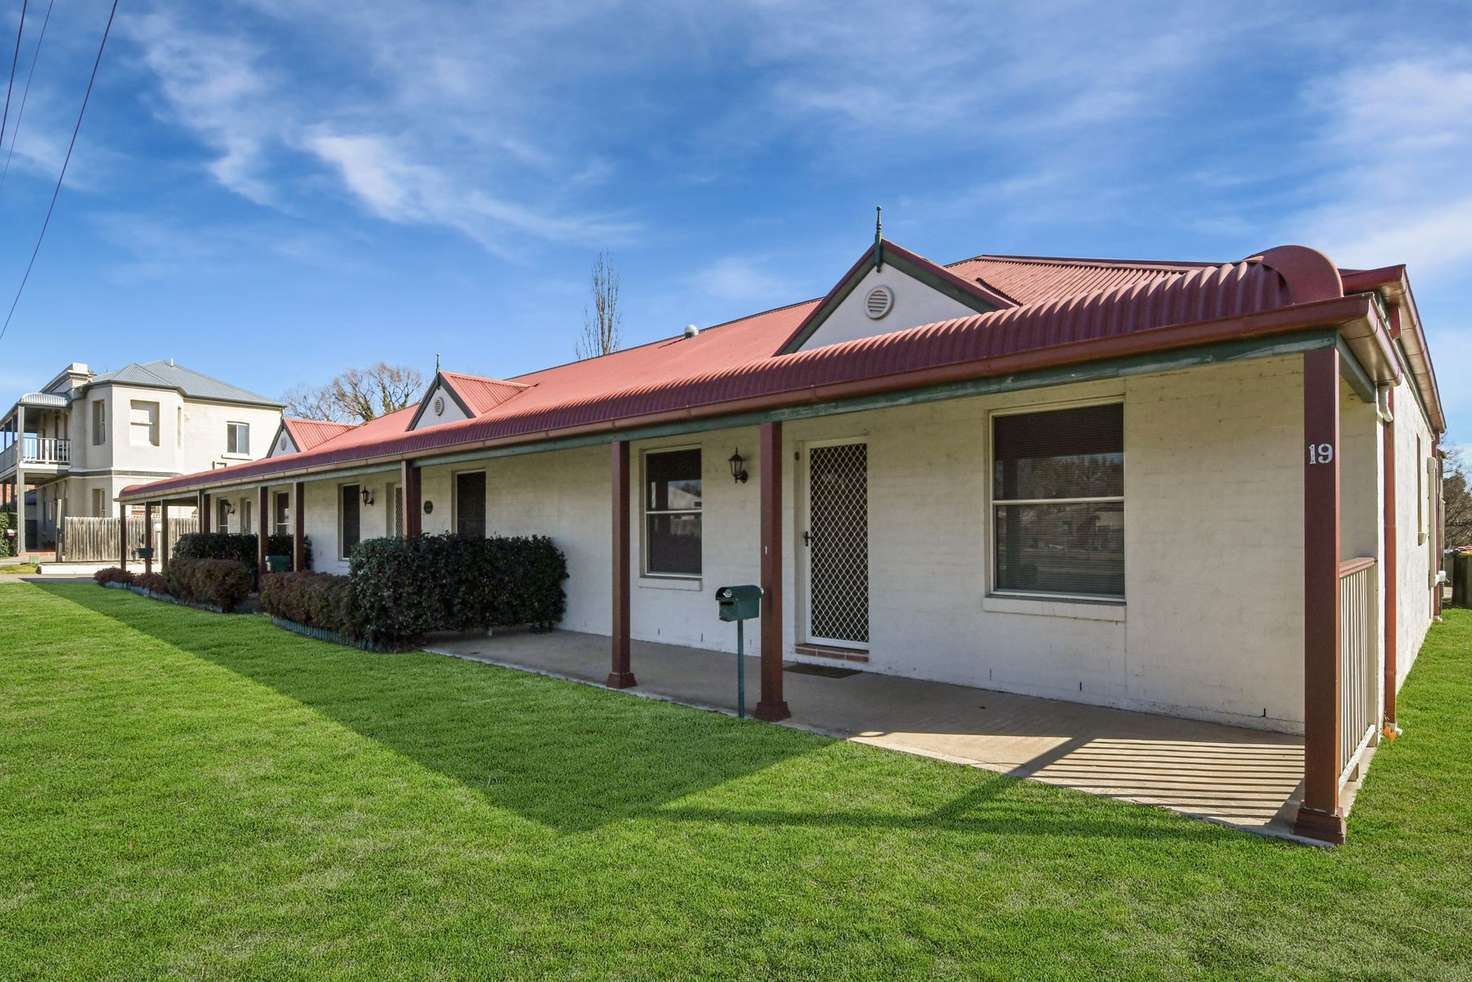 Main view of Homely house listing, 1/19 Rankin Street, Bathurst NSW 2795